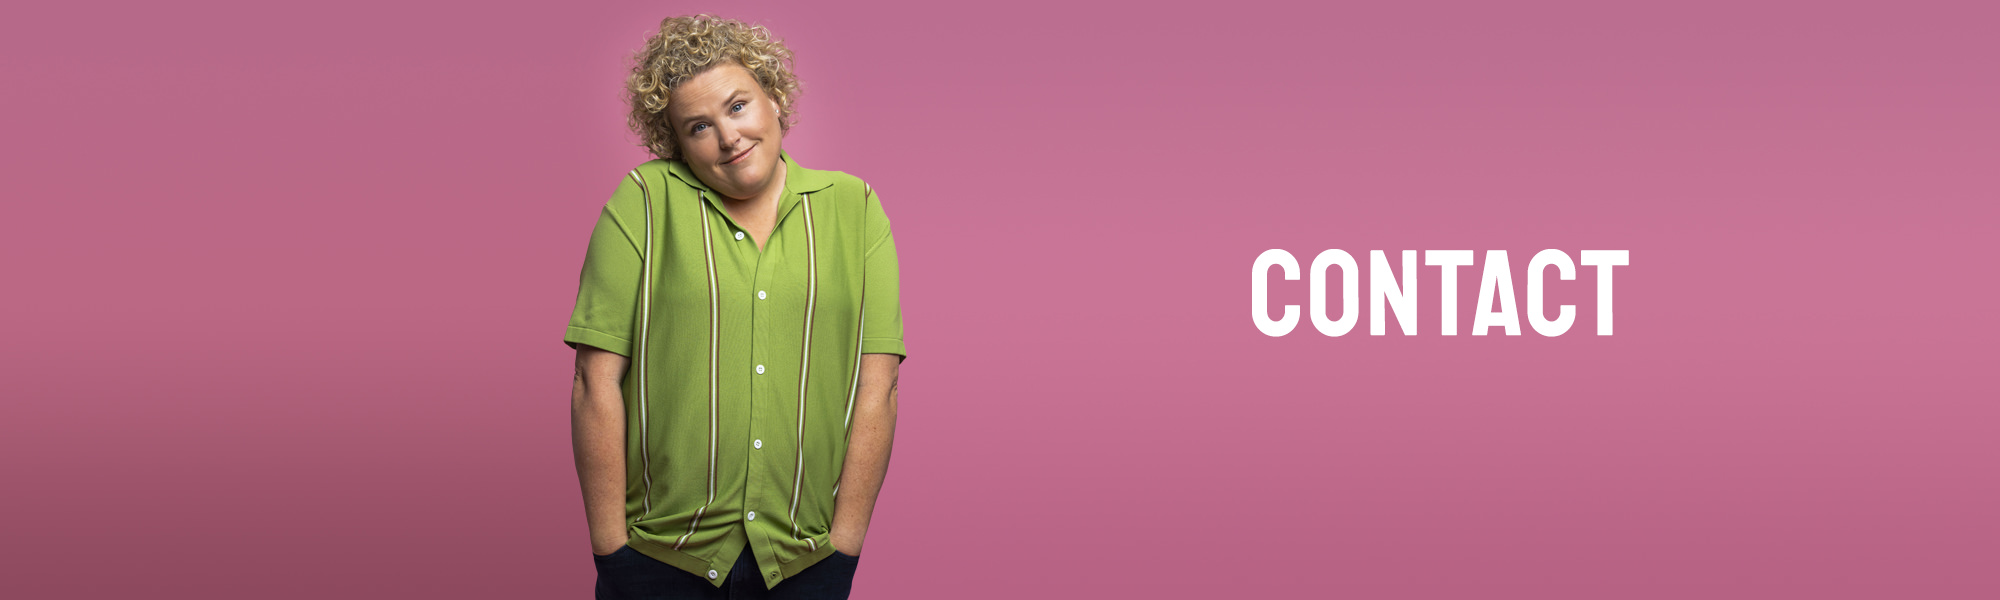 Comedian Fortune Feimster in front of a pink background wearing a green sweater.